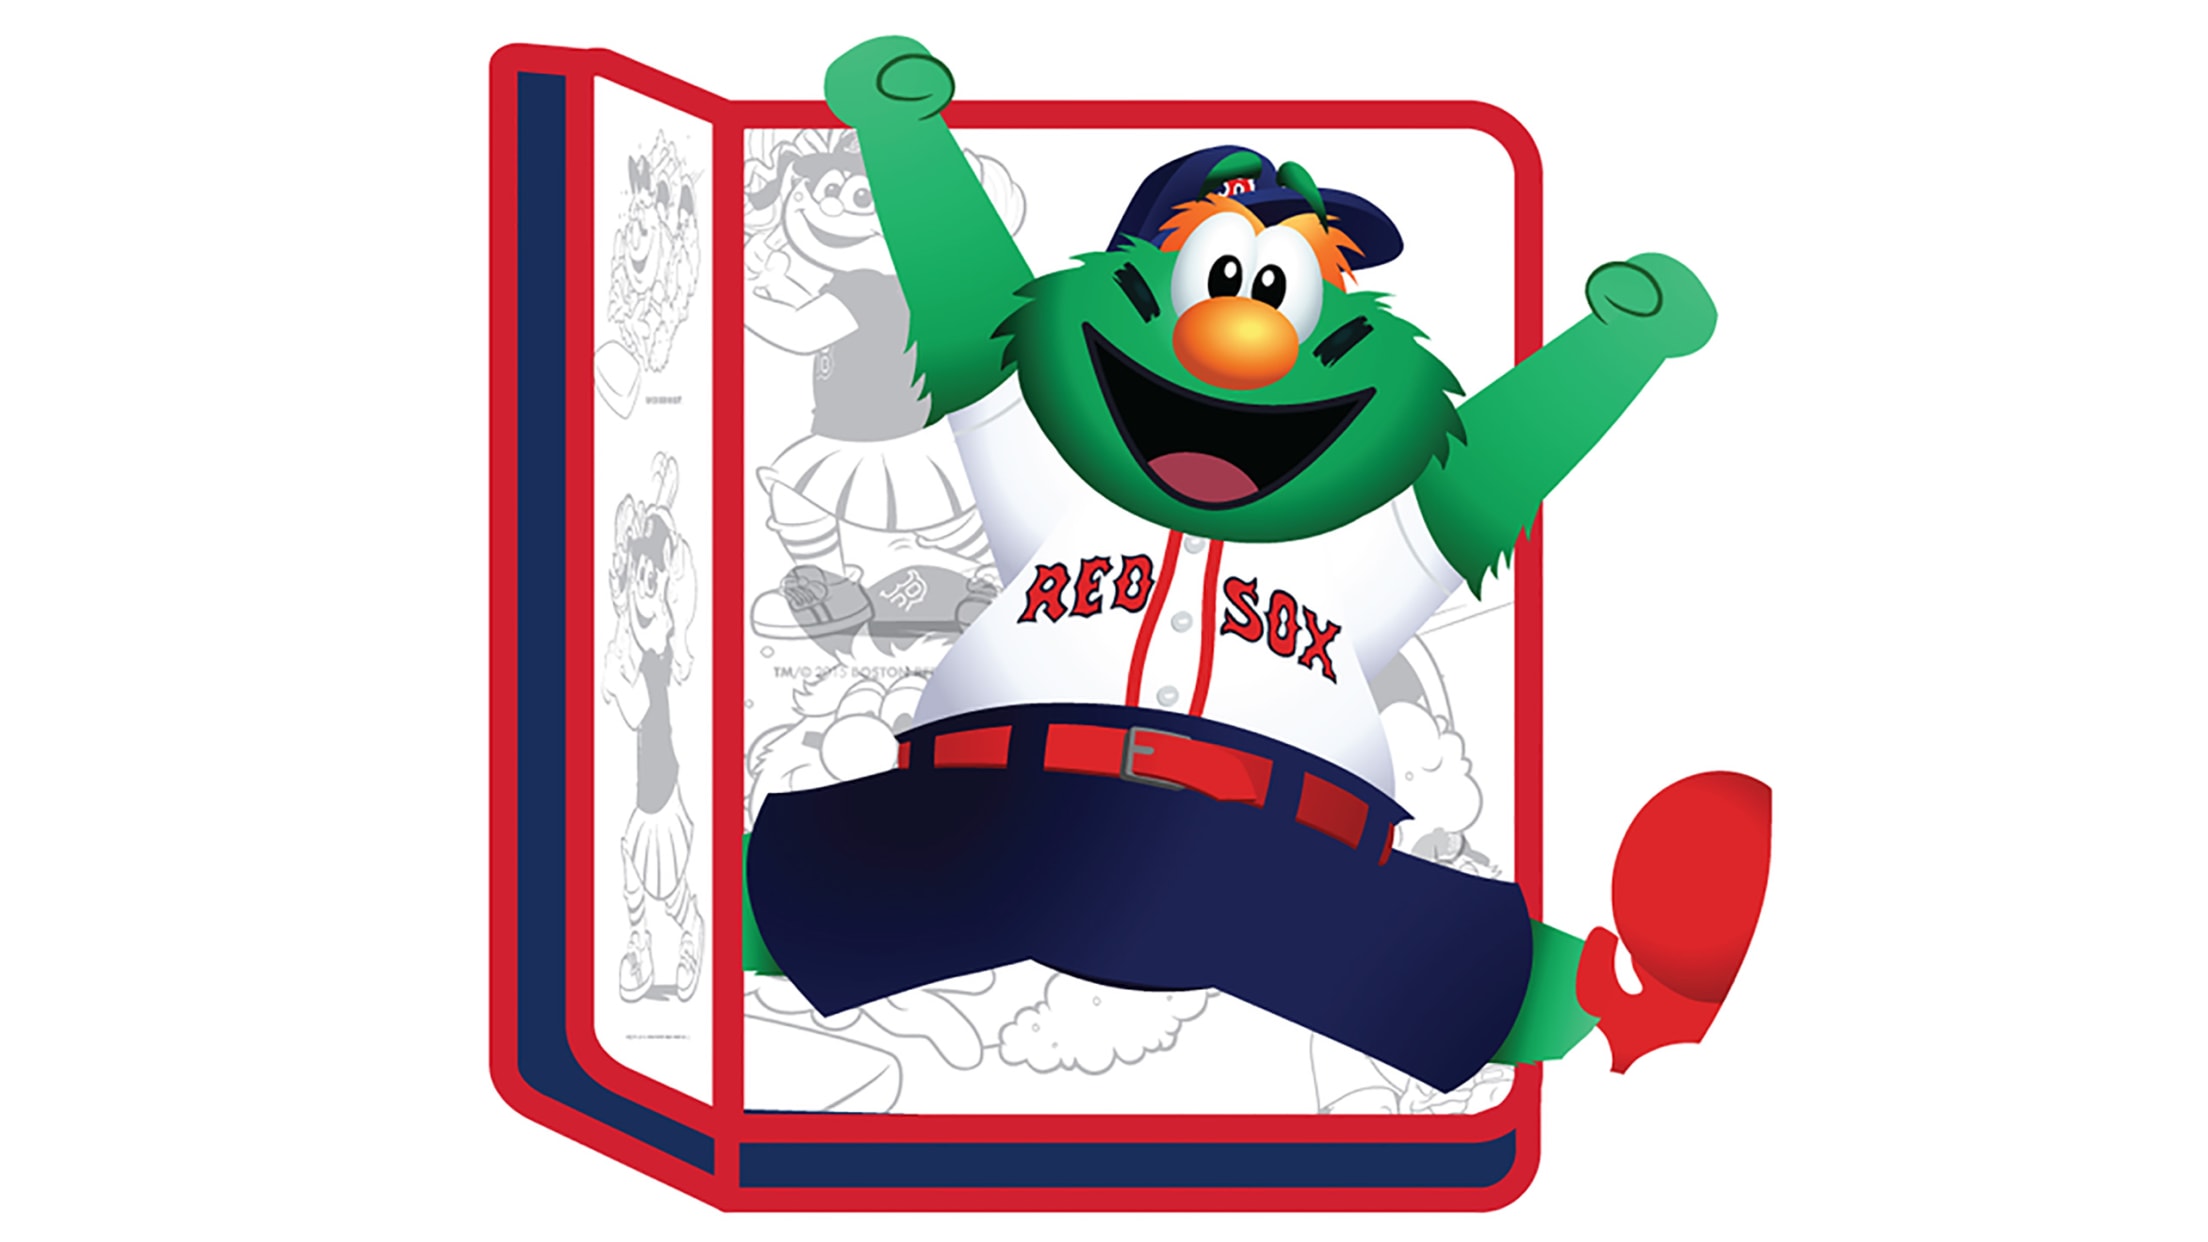 2022 Opening Day Mascots #M-2 Wally the Green Monster - Boston Red Sox